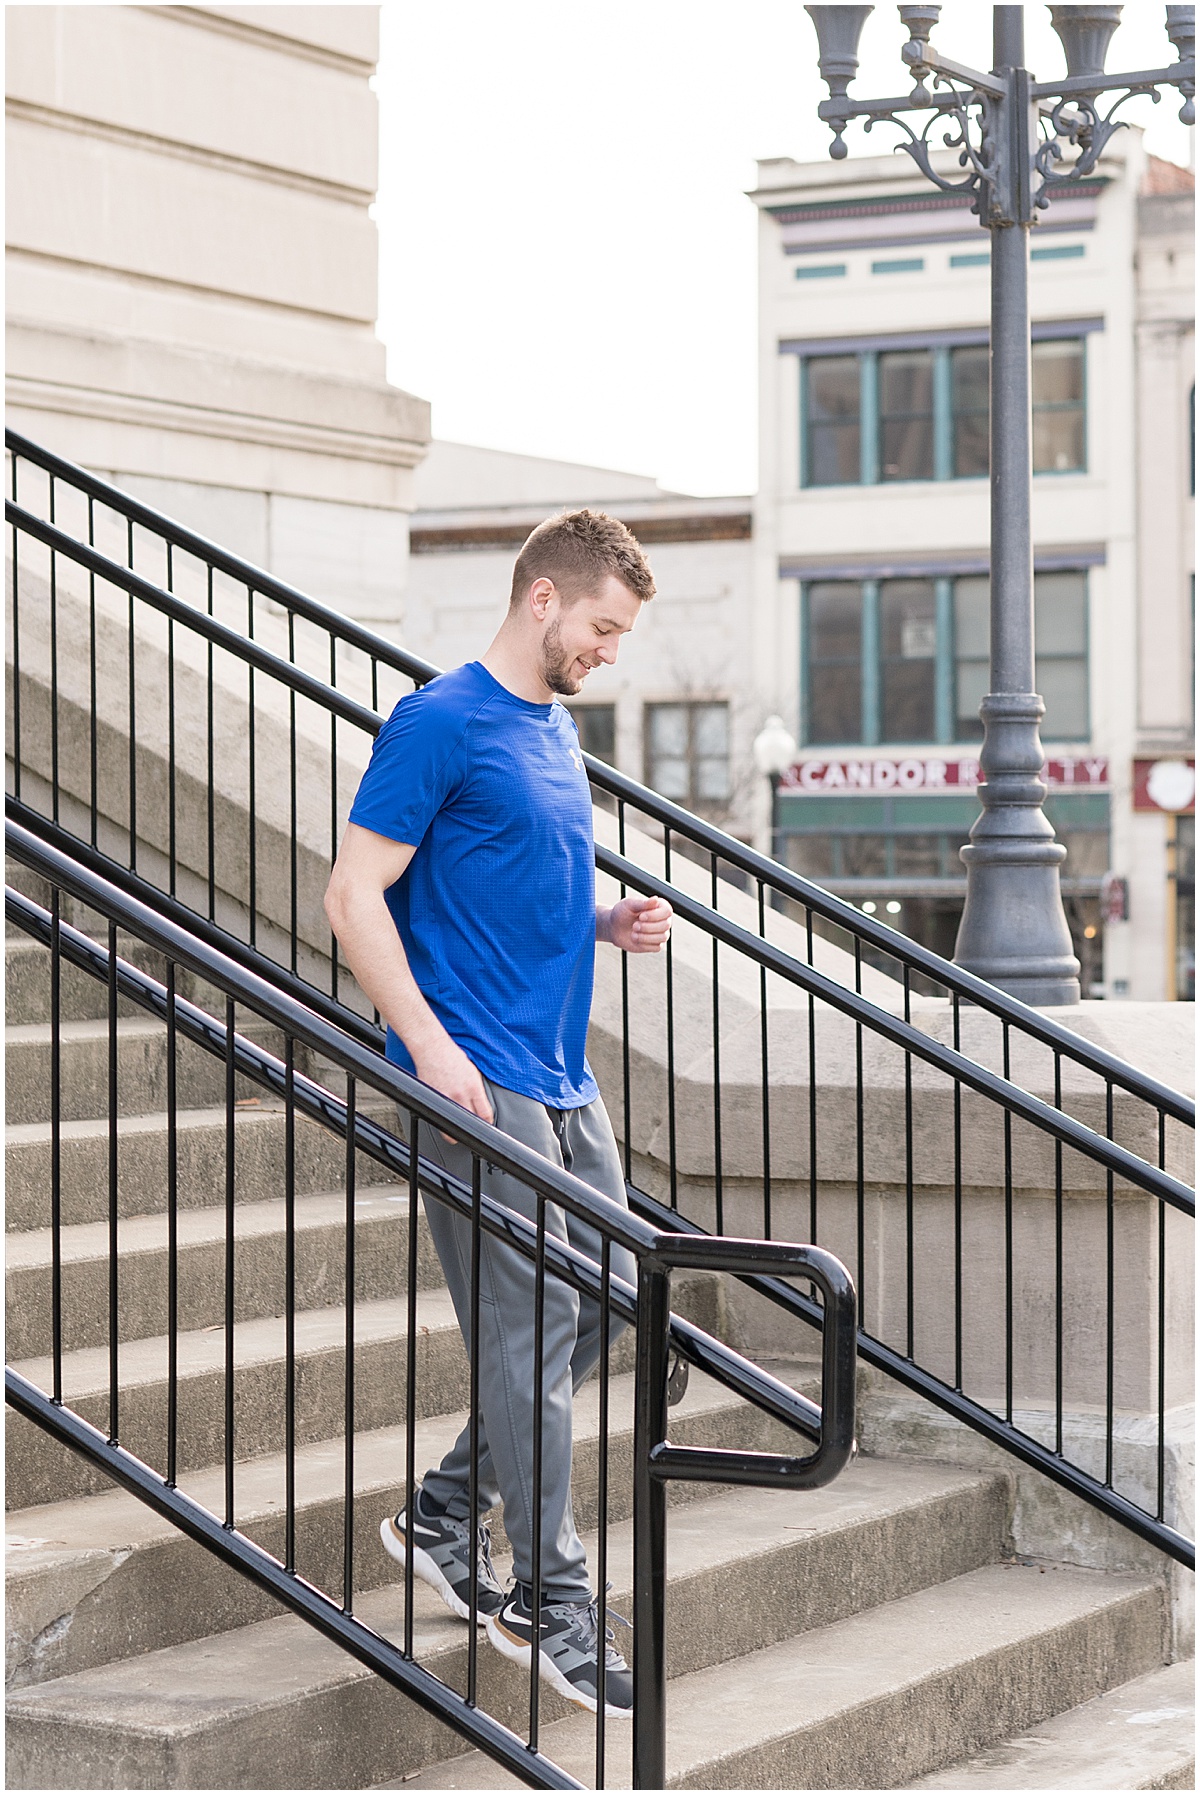 Frank Berenda running stairs for personal trainer branding photos in downtown Lafayette, Indiana